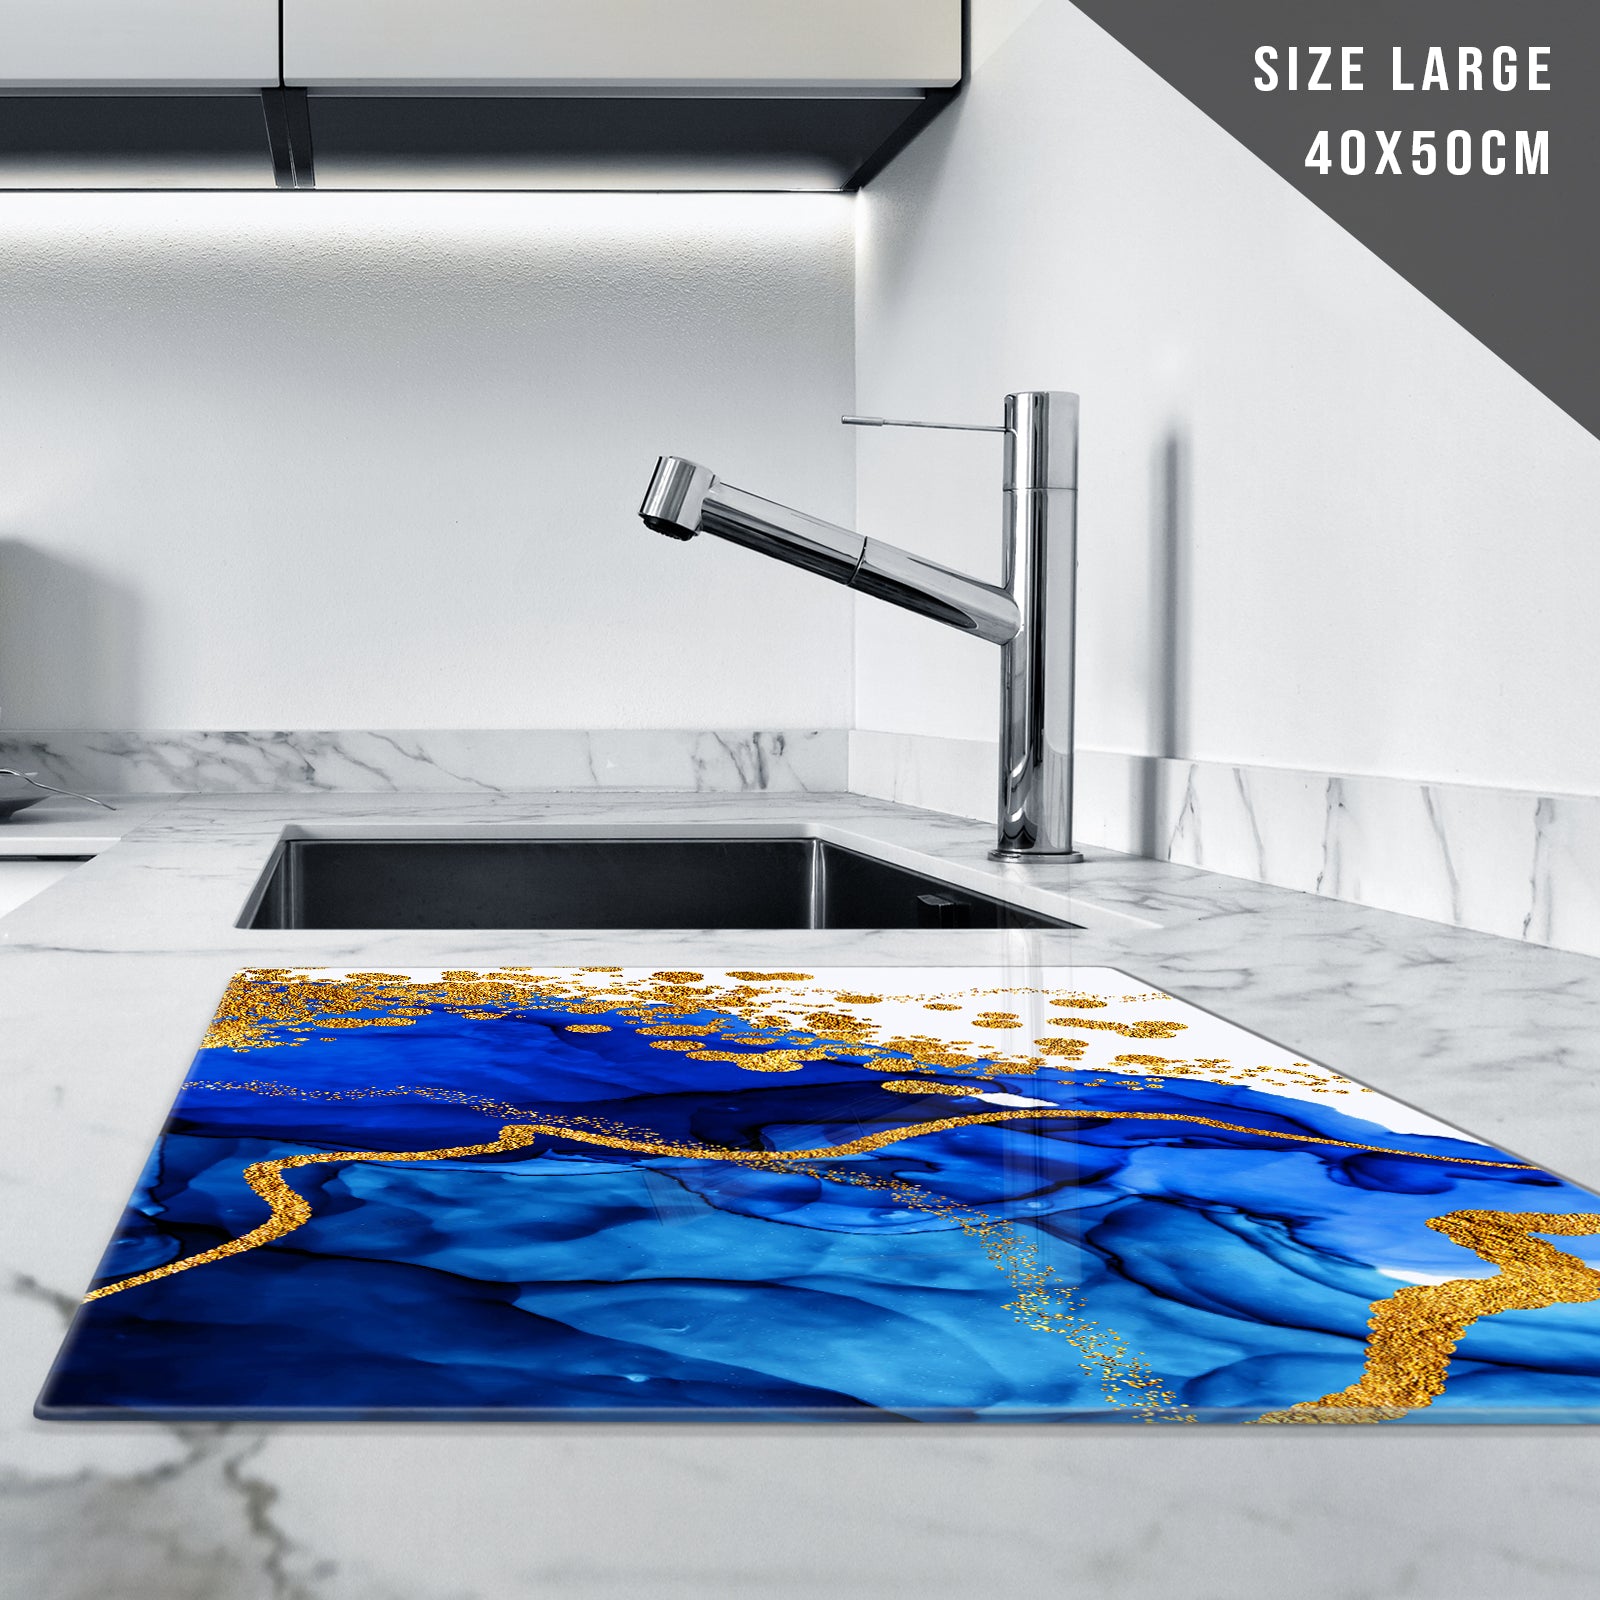 Glass Chopping Board for Kitchen in Blue Gold White Design